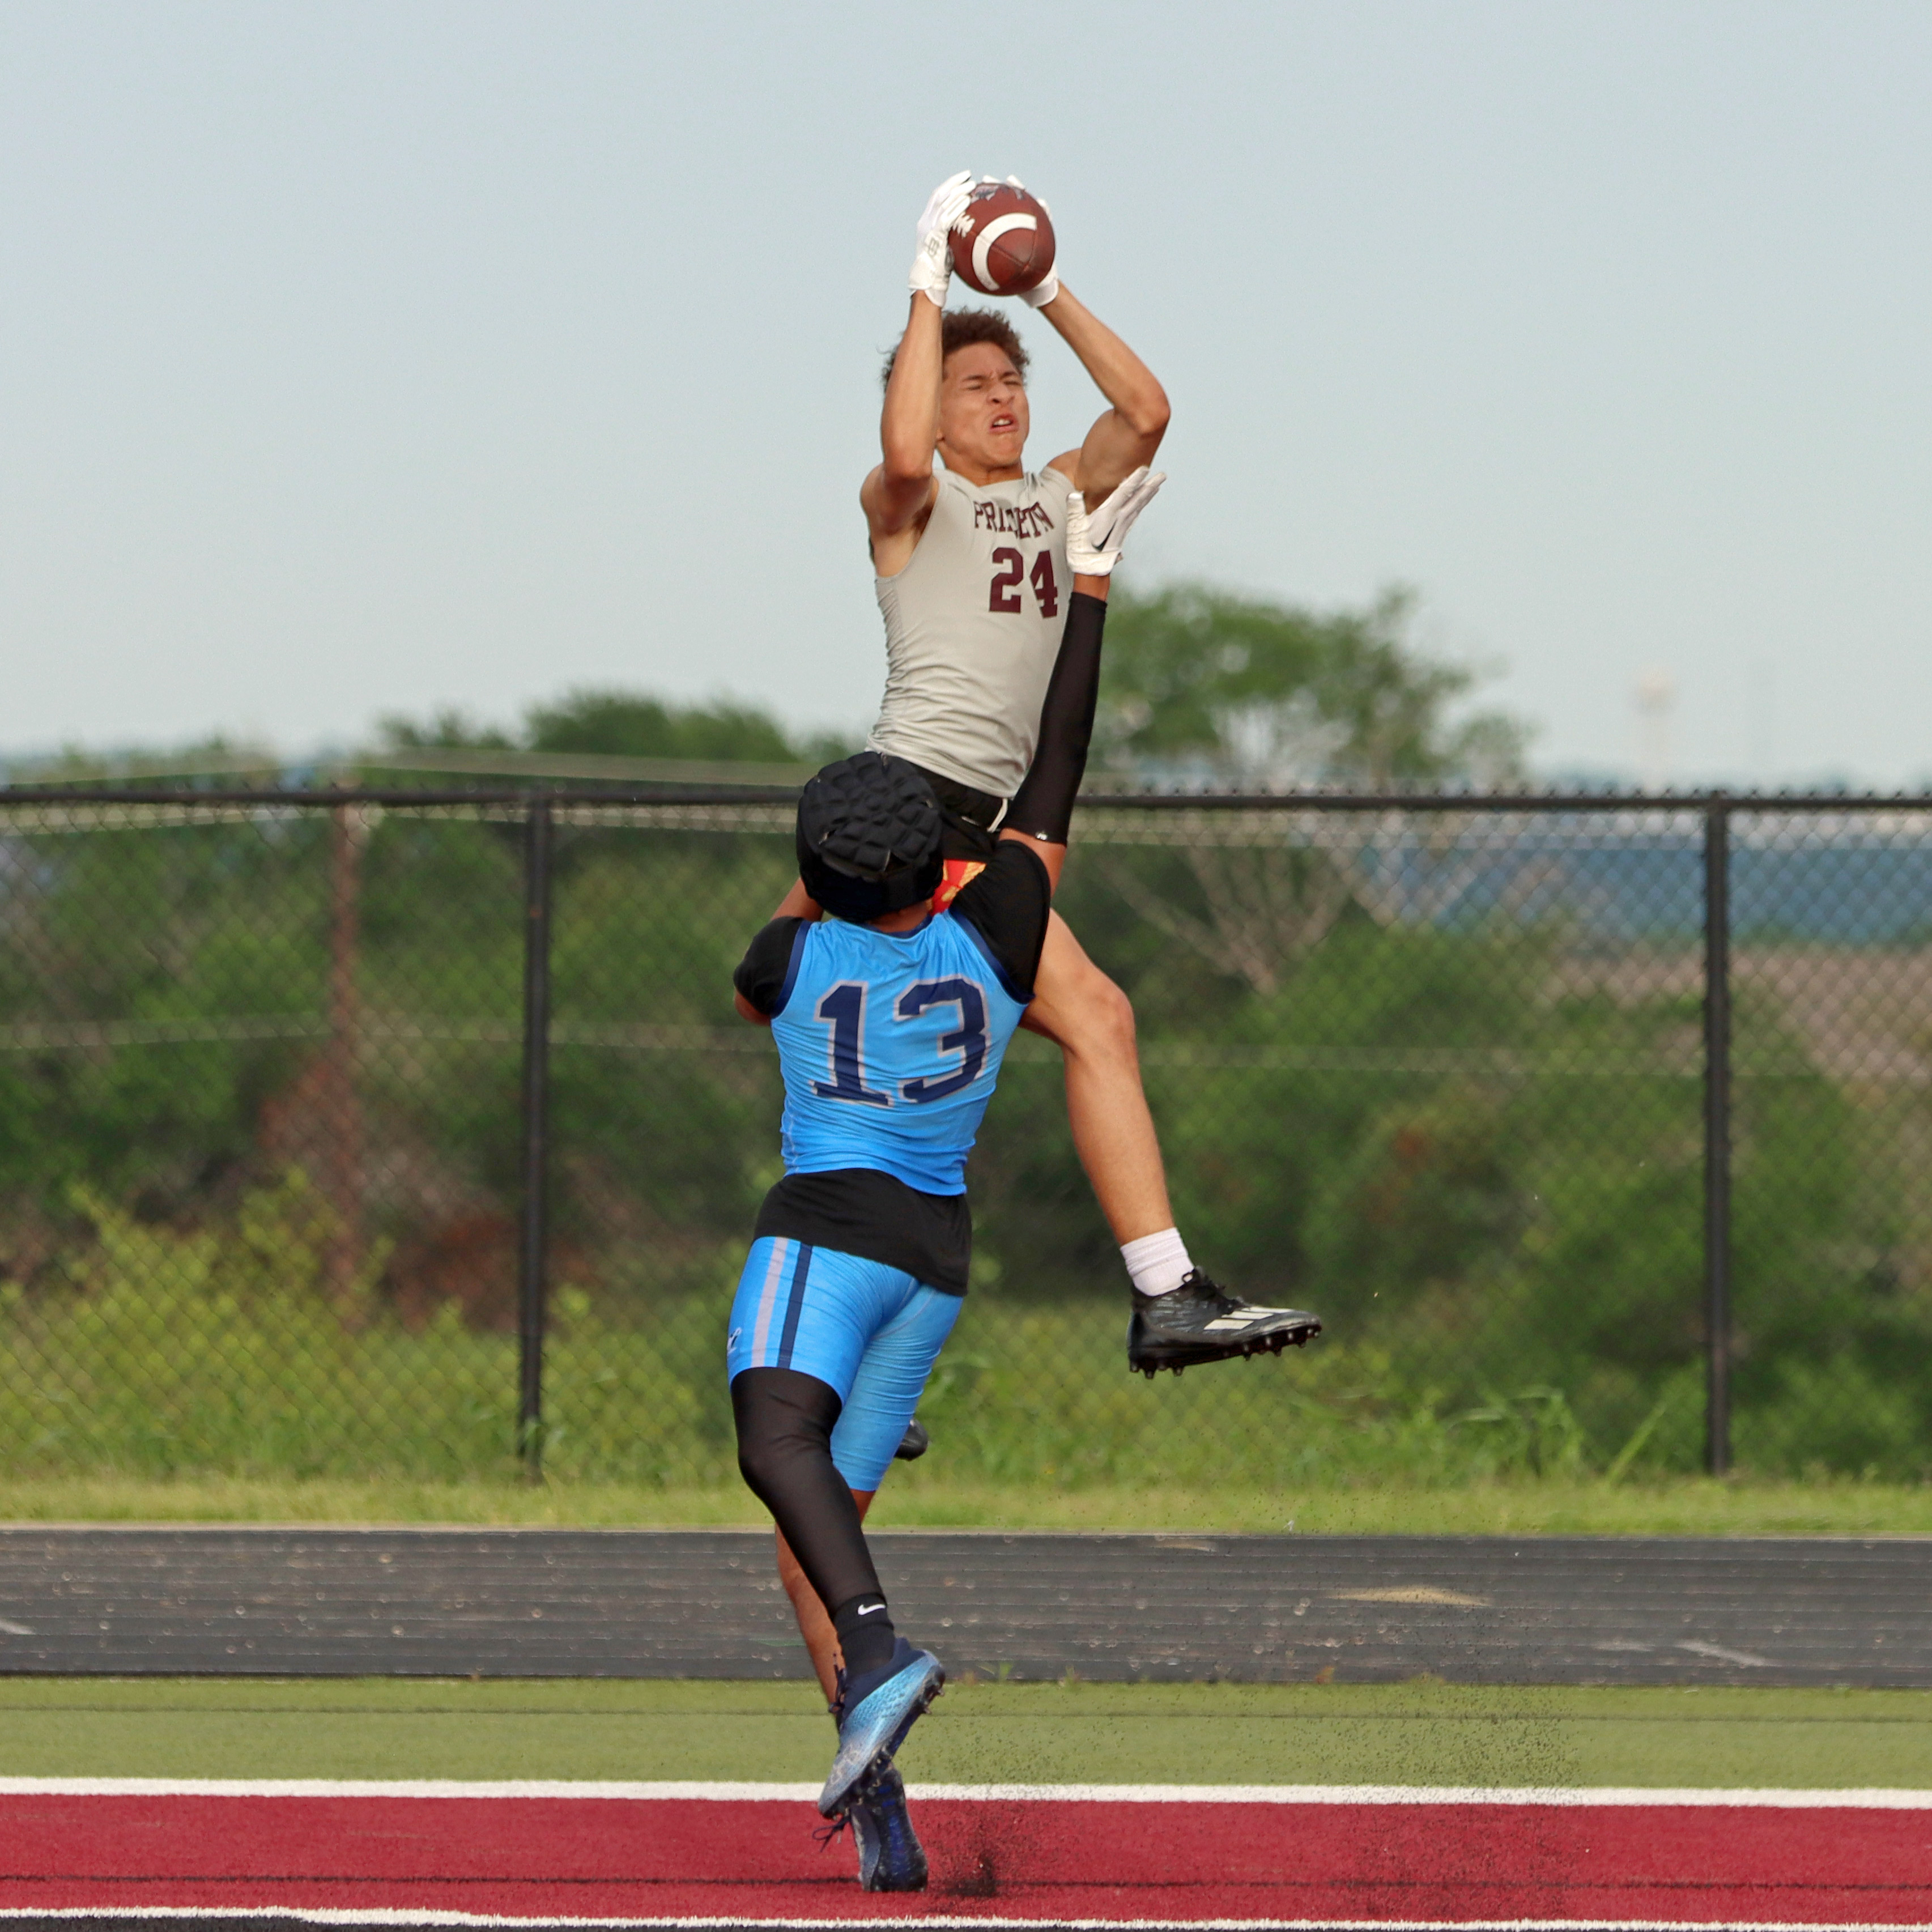 Panthers host Wylie East for 7-on-7 event